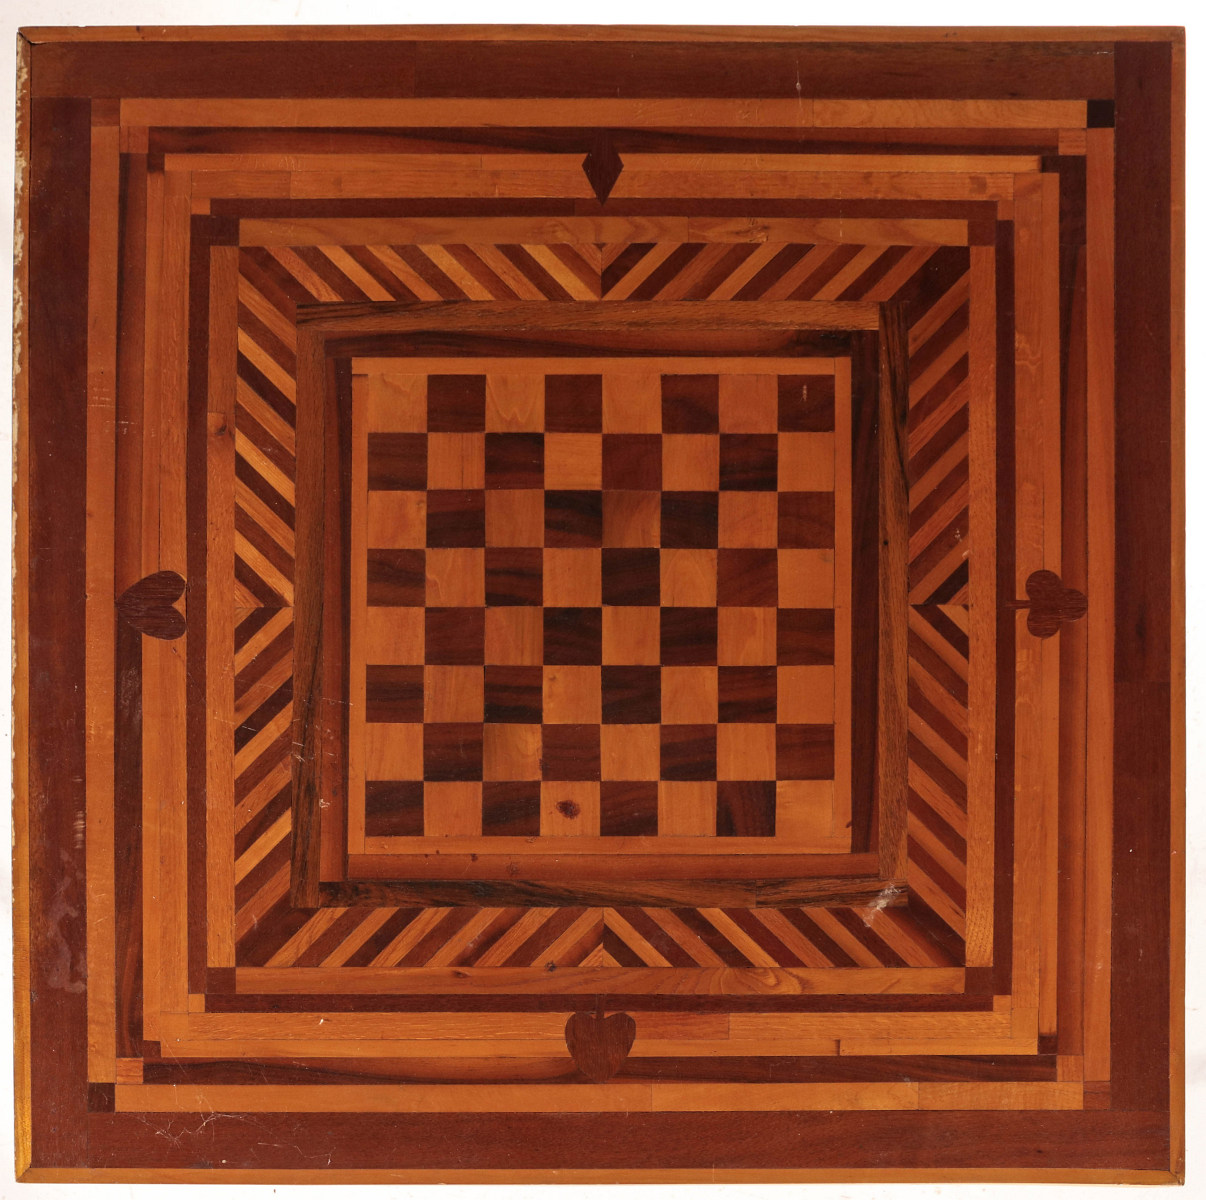 A FOLKY INLAID MARQUETRY TABLE WITH GAME BOARD TOP